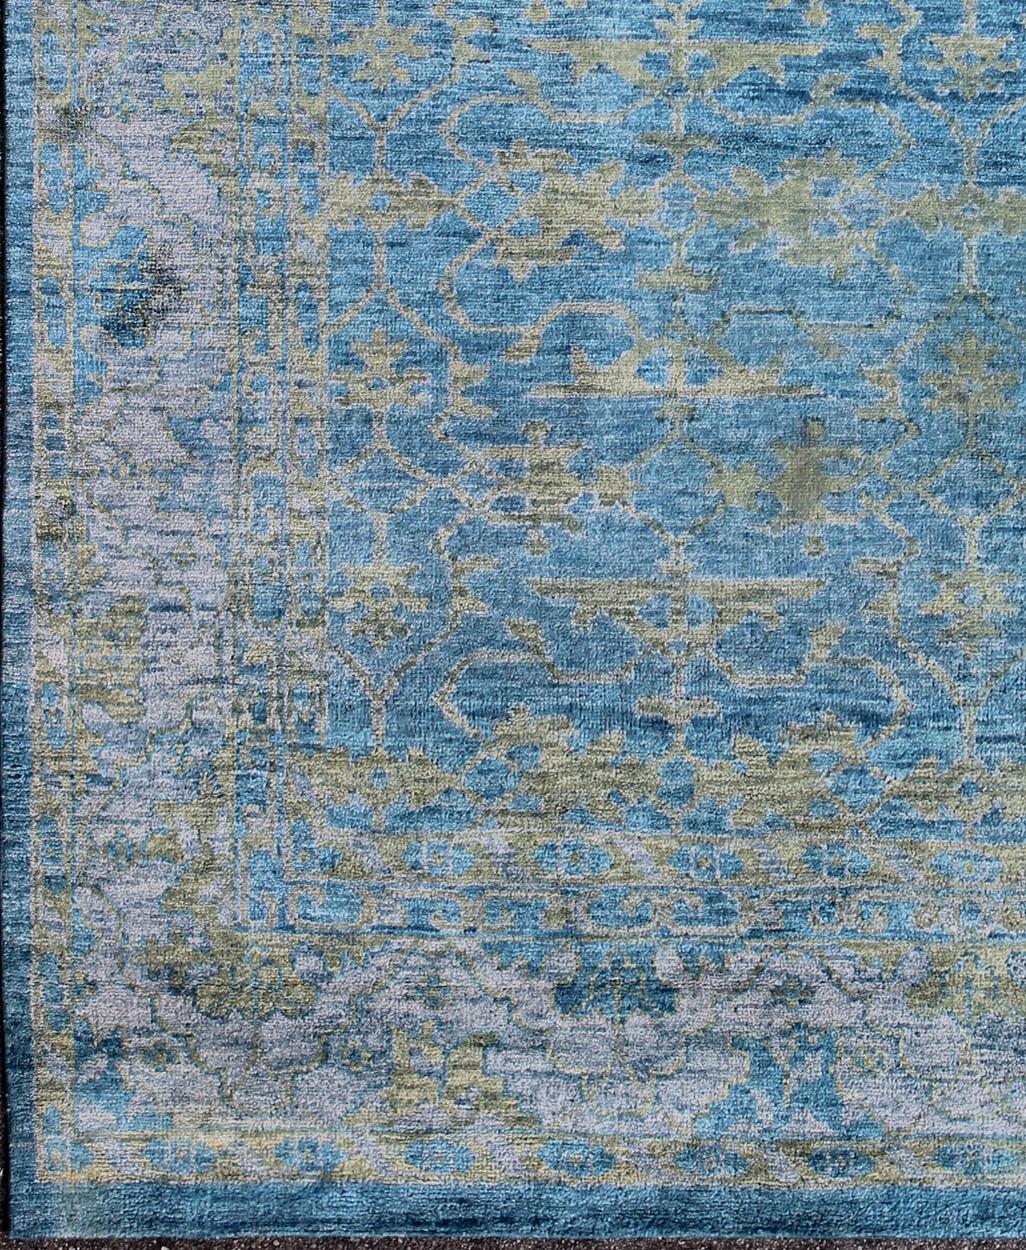 Indian Large Oushak Contemporary Rug in Blue, Silver Gray/Lavender & Yellow Green